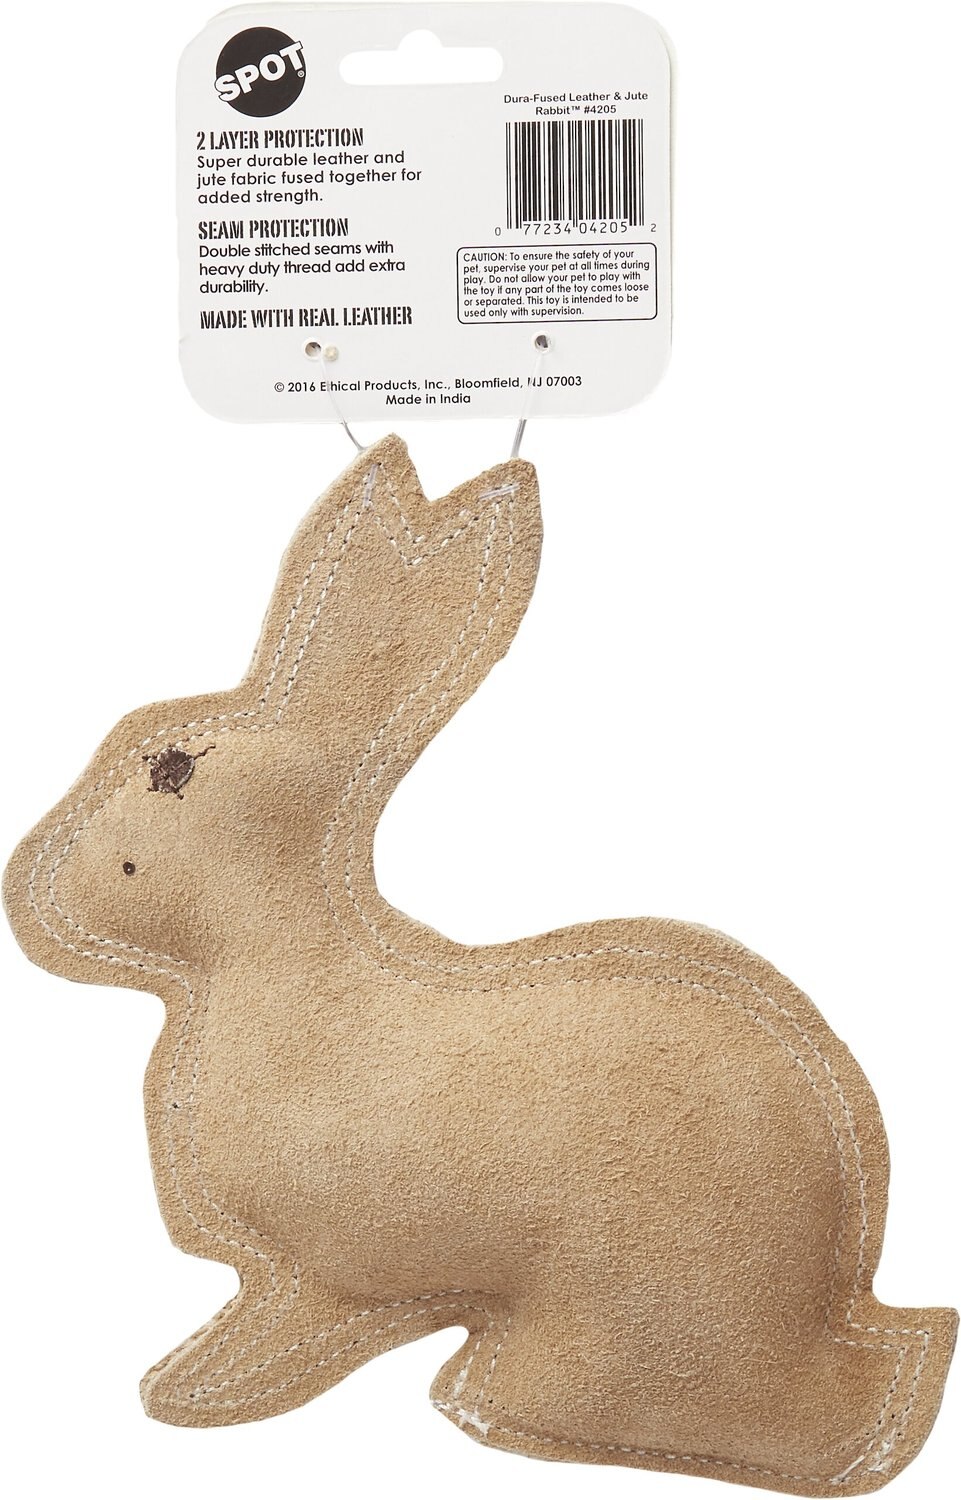 Ethical Pet Dura-Fused 7.5-Inch Leather Dog Toy Rabbit Fоur Расk Small